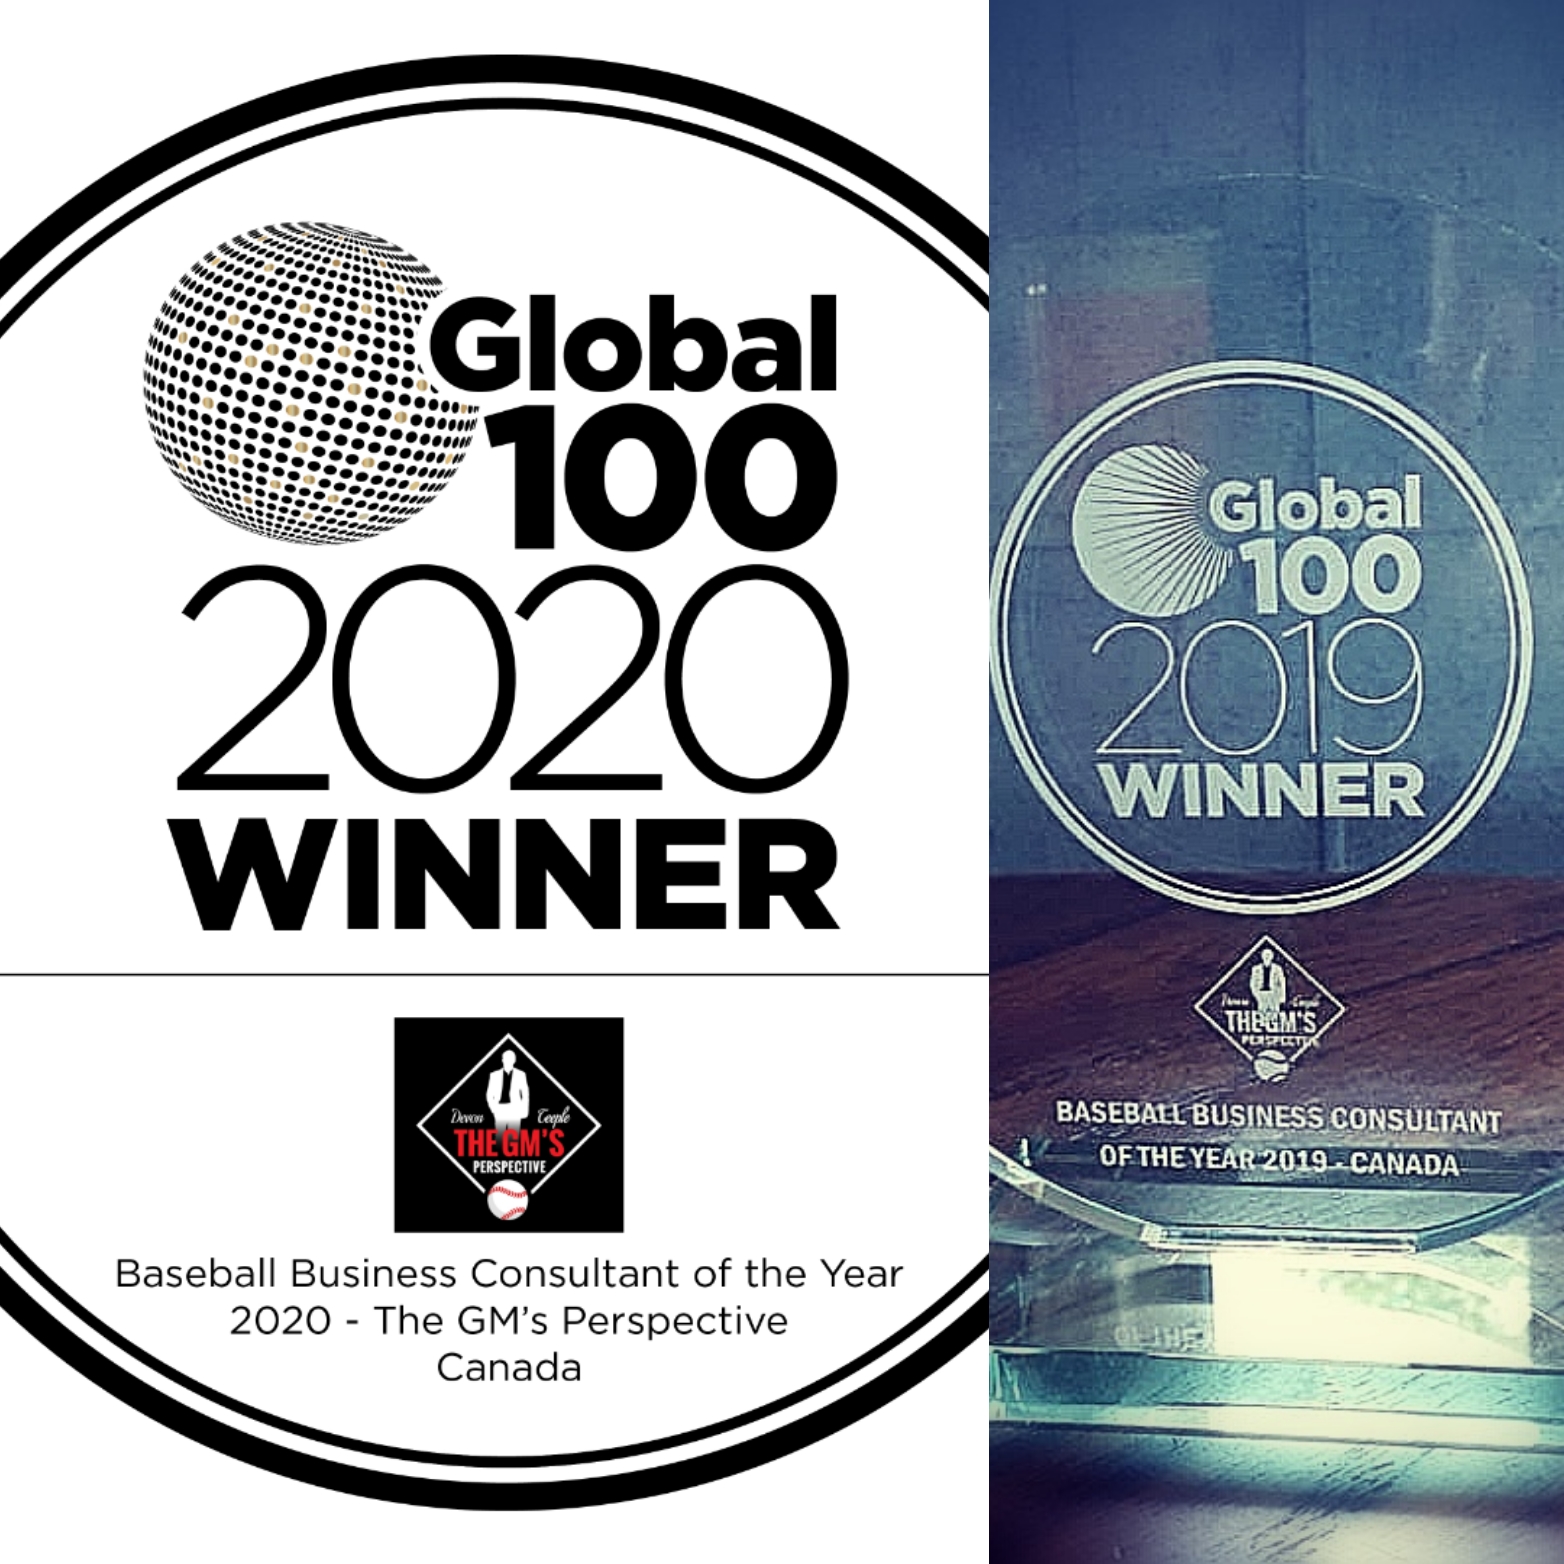 Global 100 Award Recipient The GM's Perspective